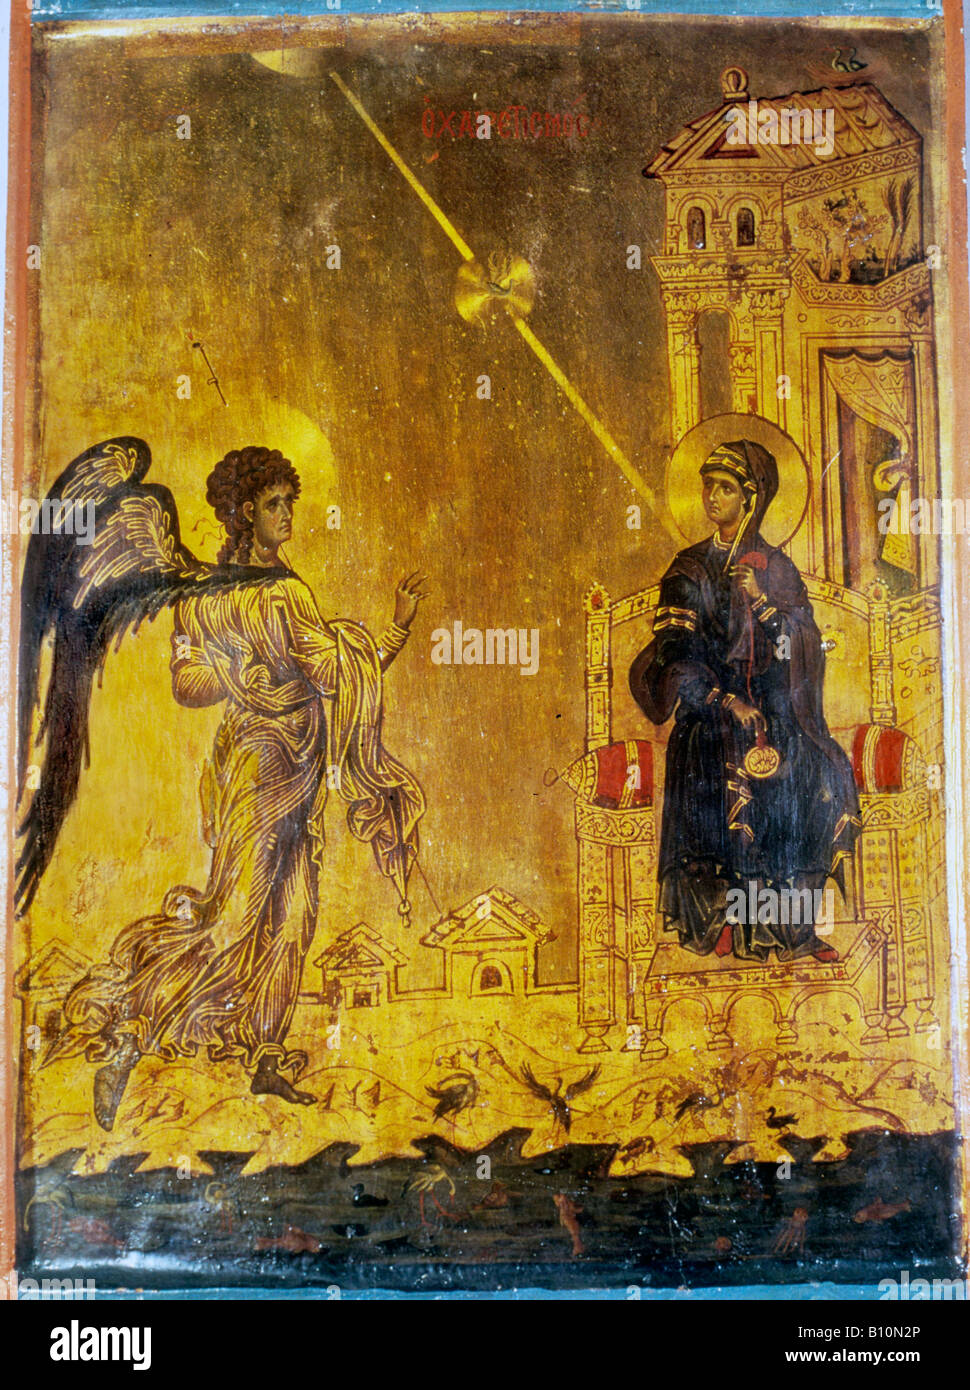 The Annunciation icon St Catherine's Monastery Sinai Egypt. Archangel Gabriel and Blessed Virgin Mary. Stock Photo